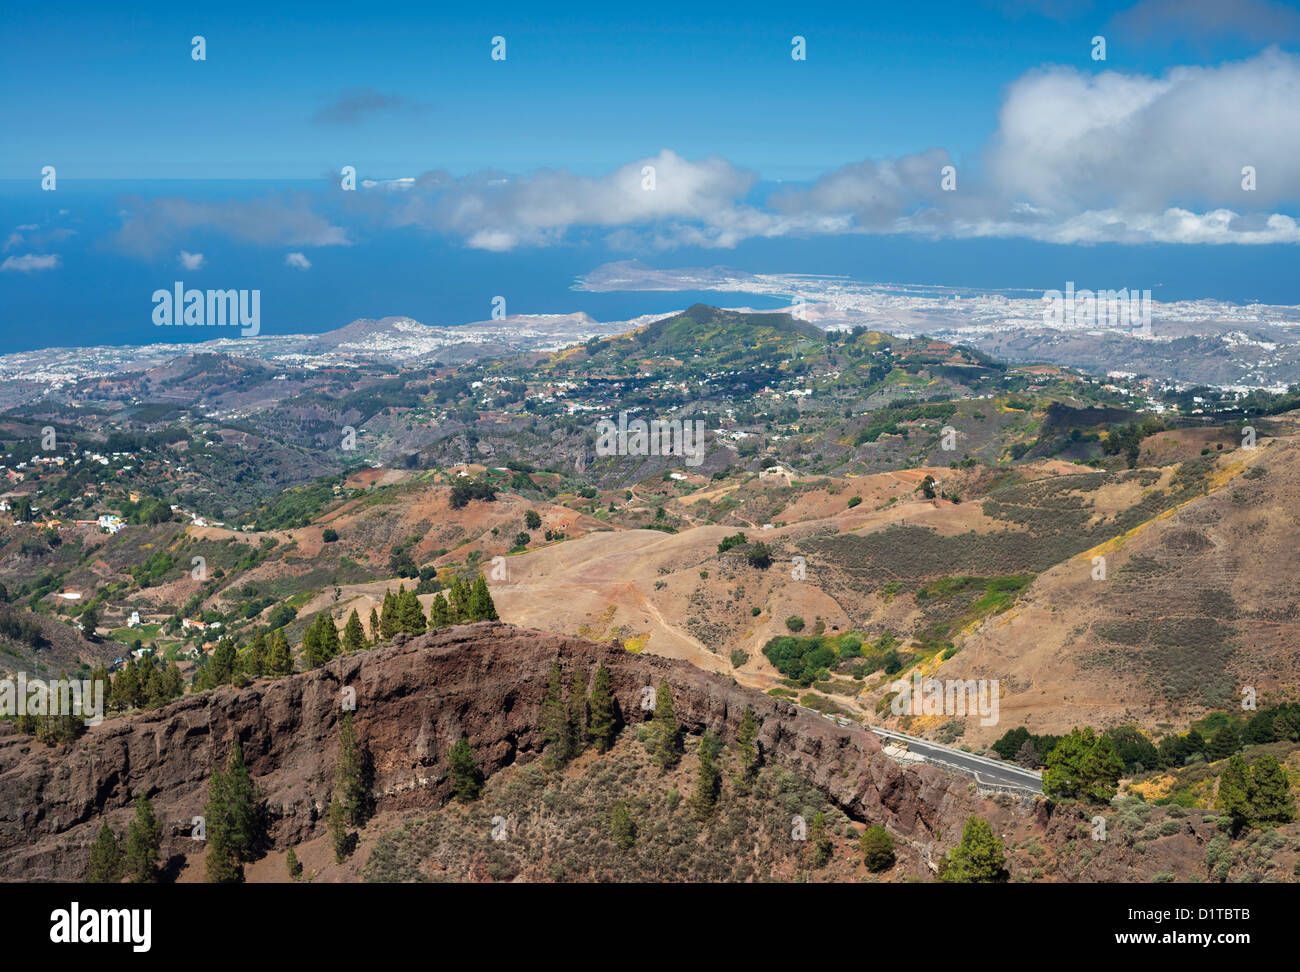 View over the northern part of Gran Canaria, including the capital city of Las Palmas, from the Pinos de Galdar volcanic crater Stock Photo